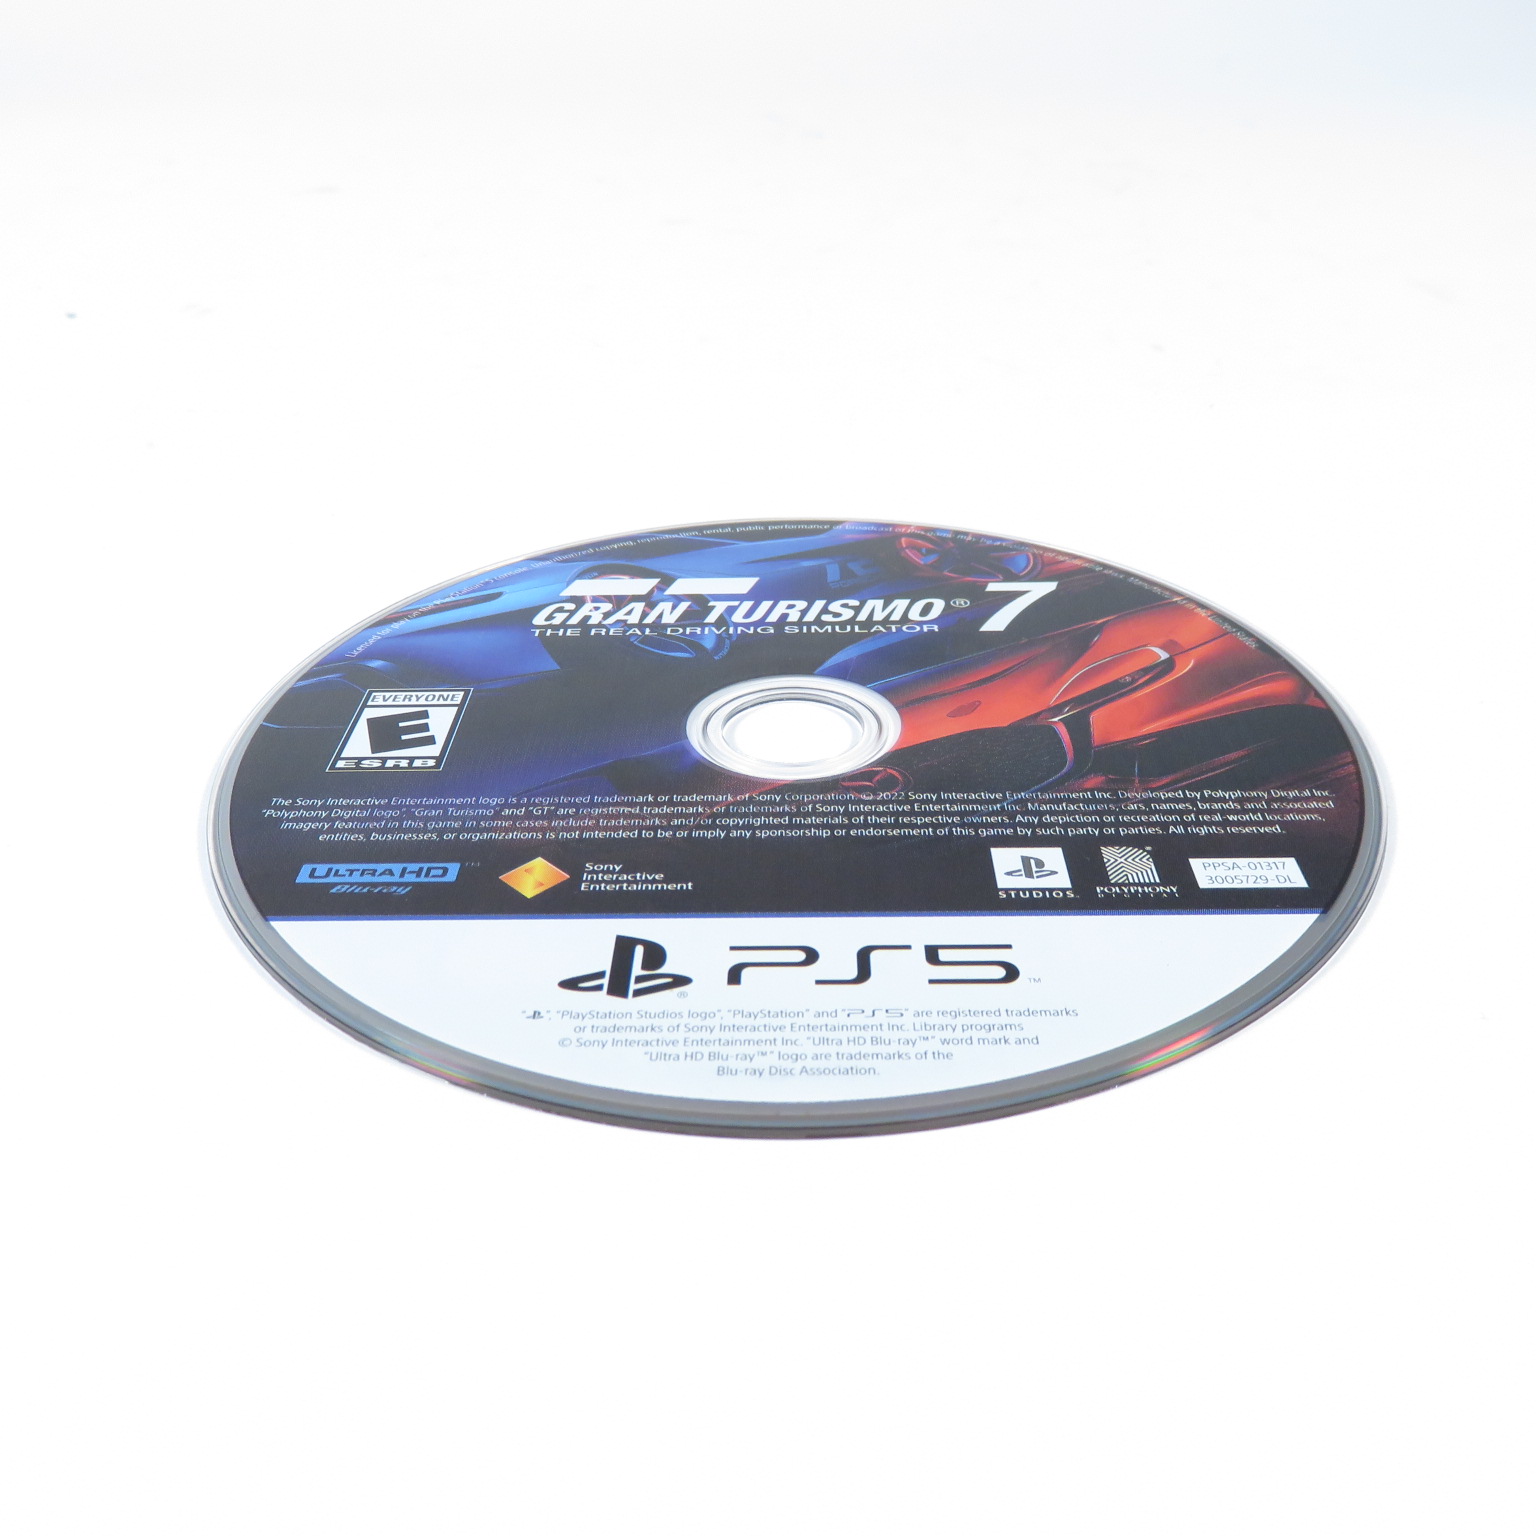 Gran Turismo 7 Video Game for the Sony PlayStation 5